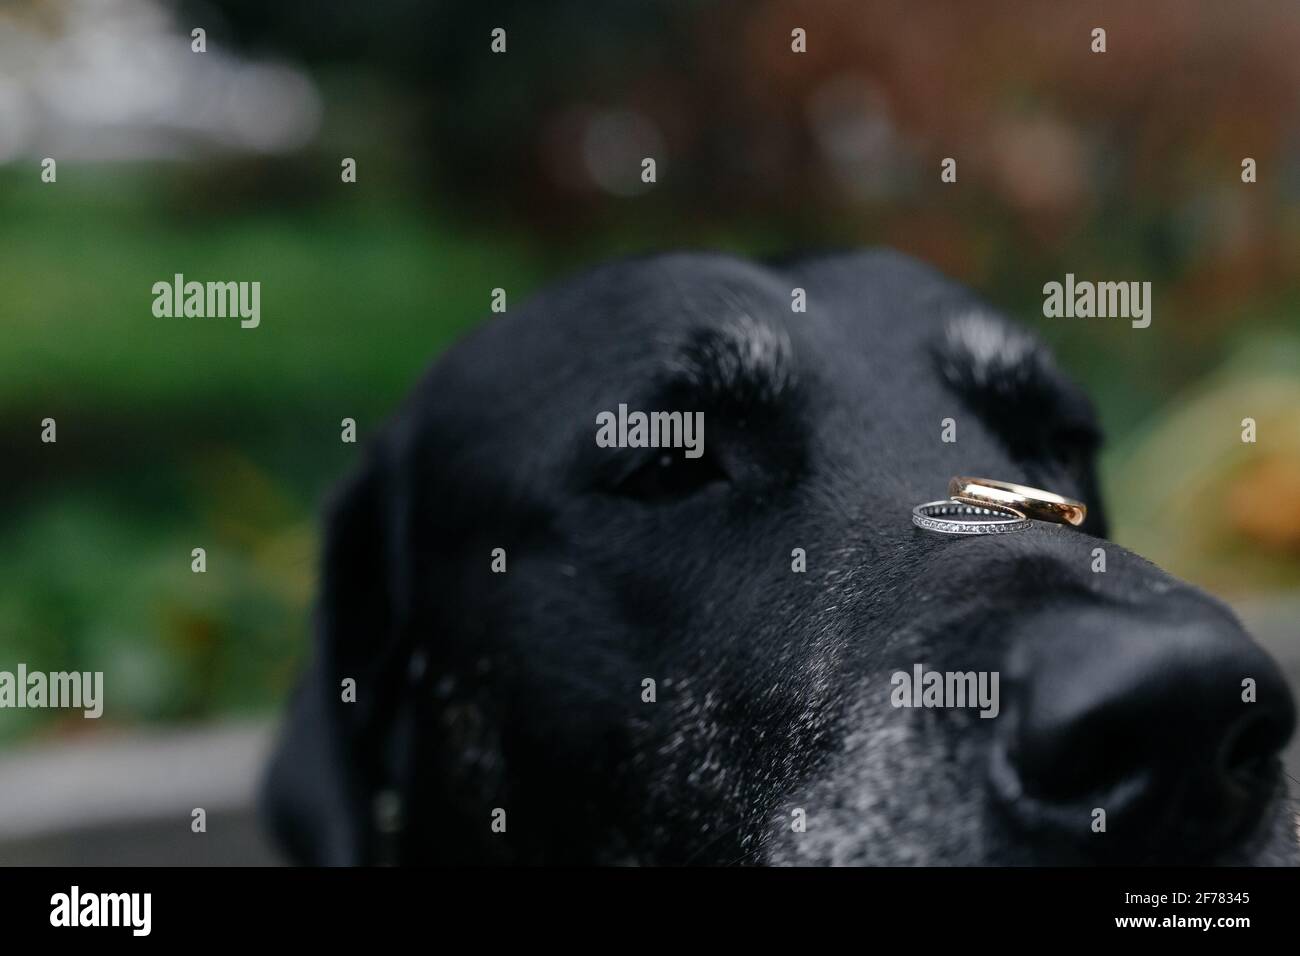 wedding rings on the nose of the black dog. Marriage proposal Stock Photo